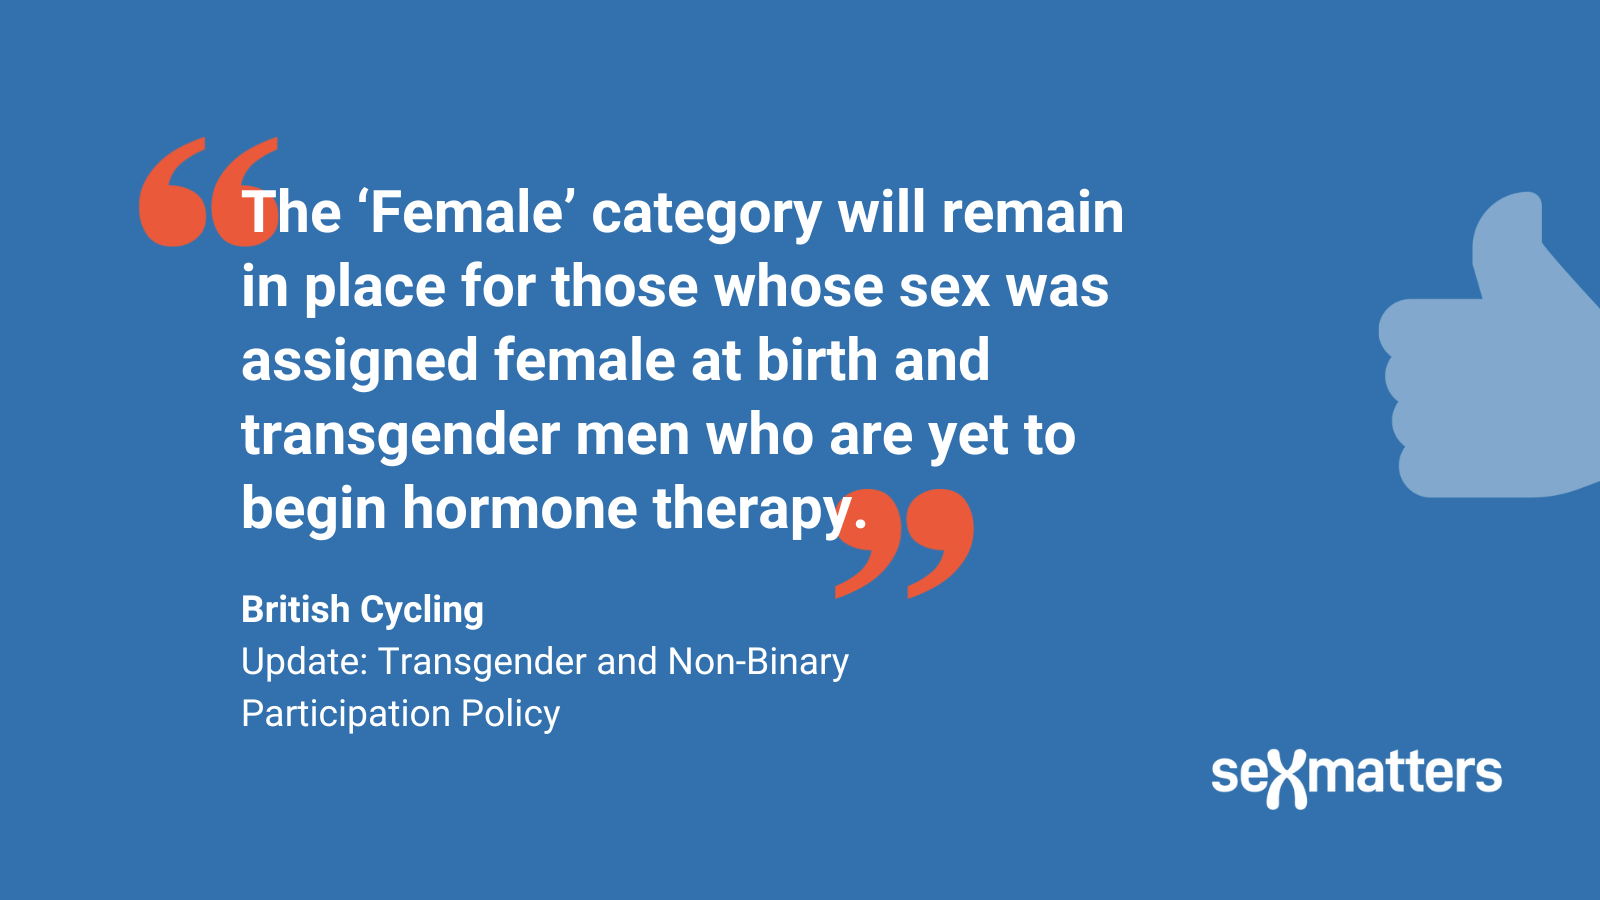 The ‘Female’ category will remain in place for those whose sex was assigned female at birth and transgender men who are yet to begin hormone therapy.